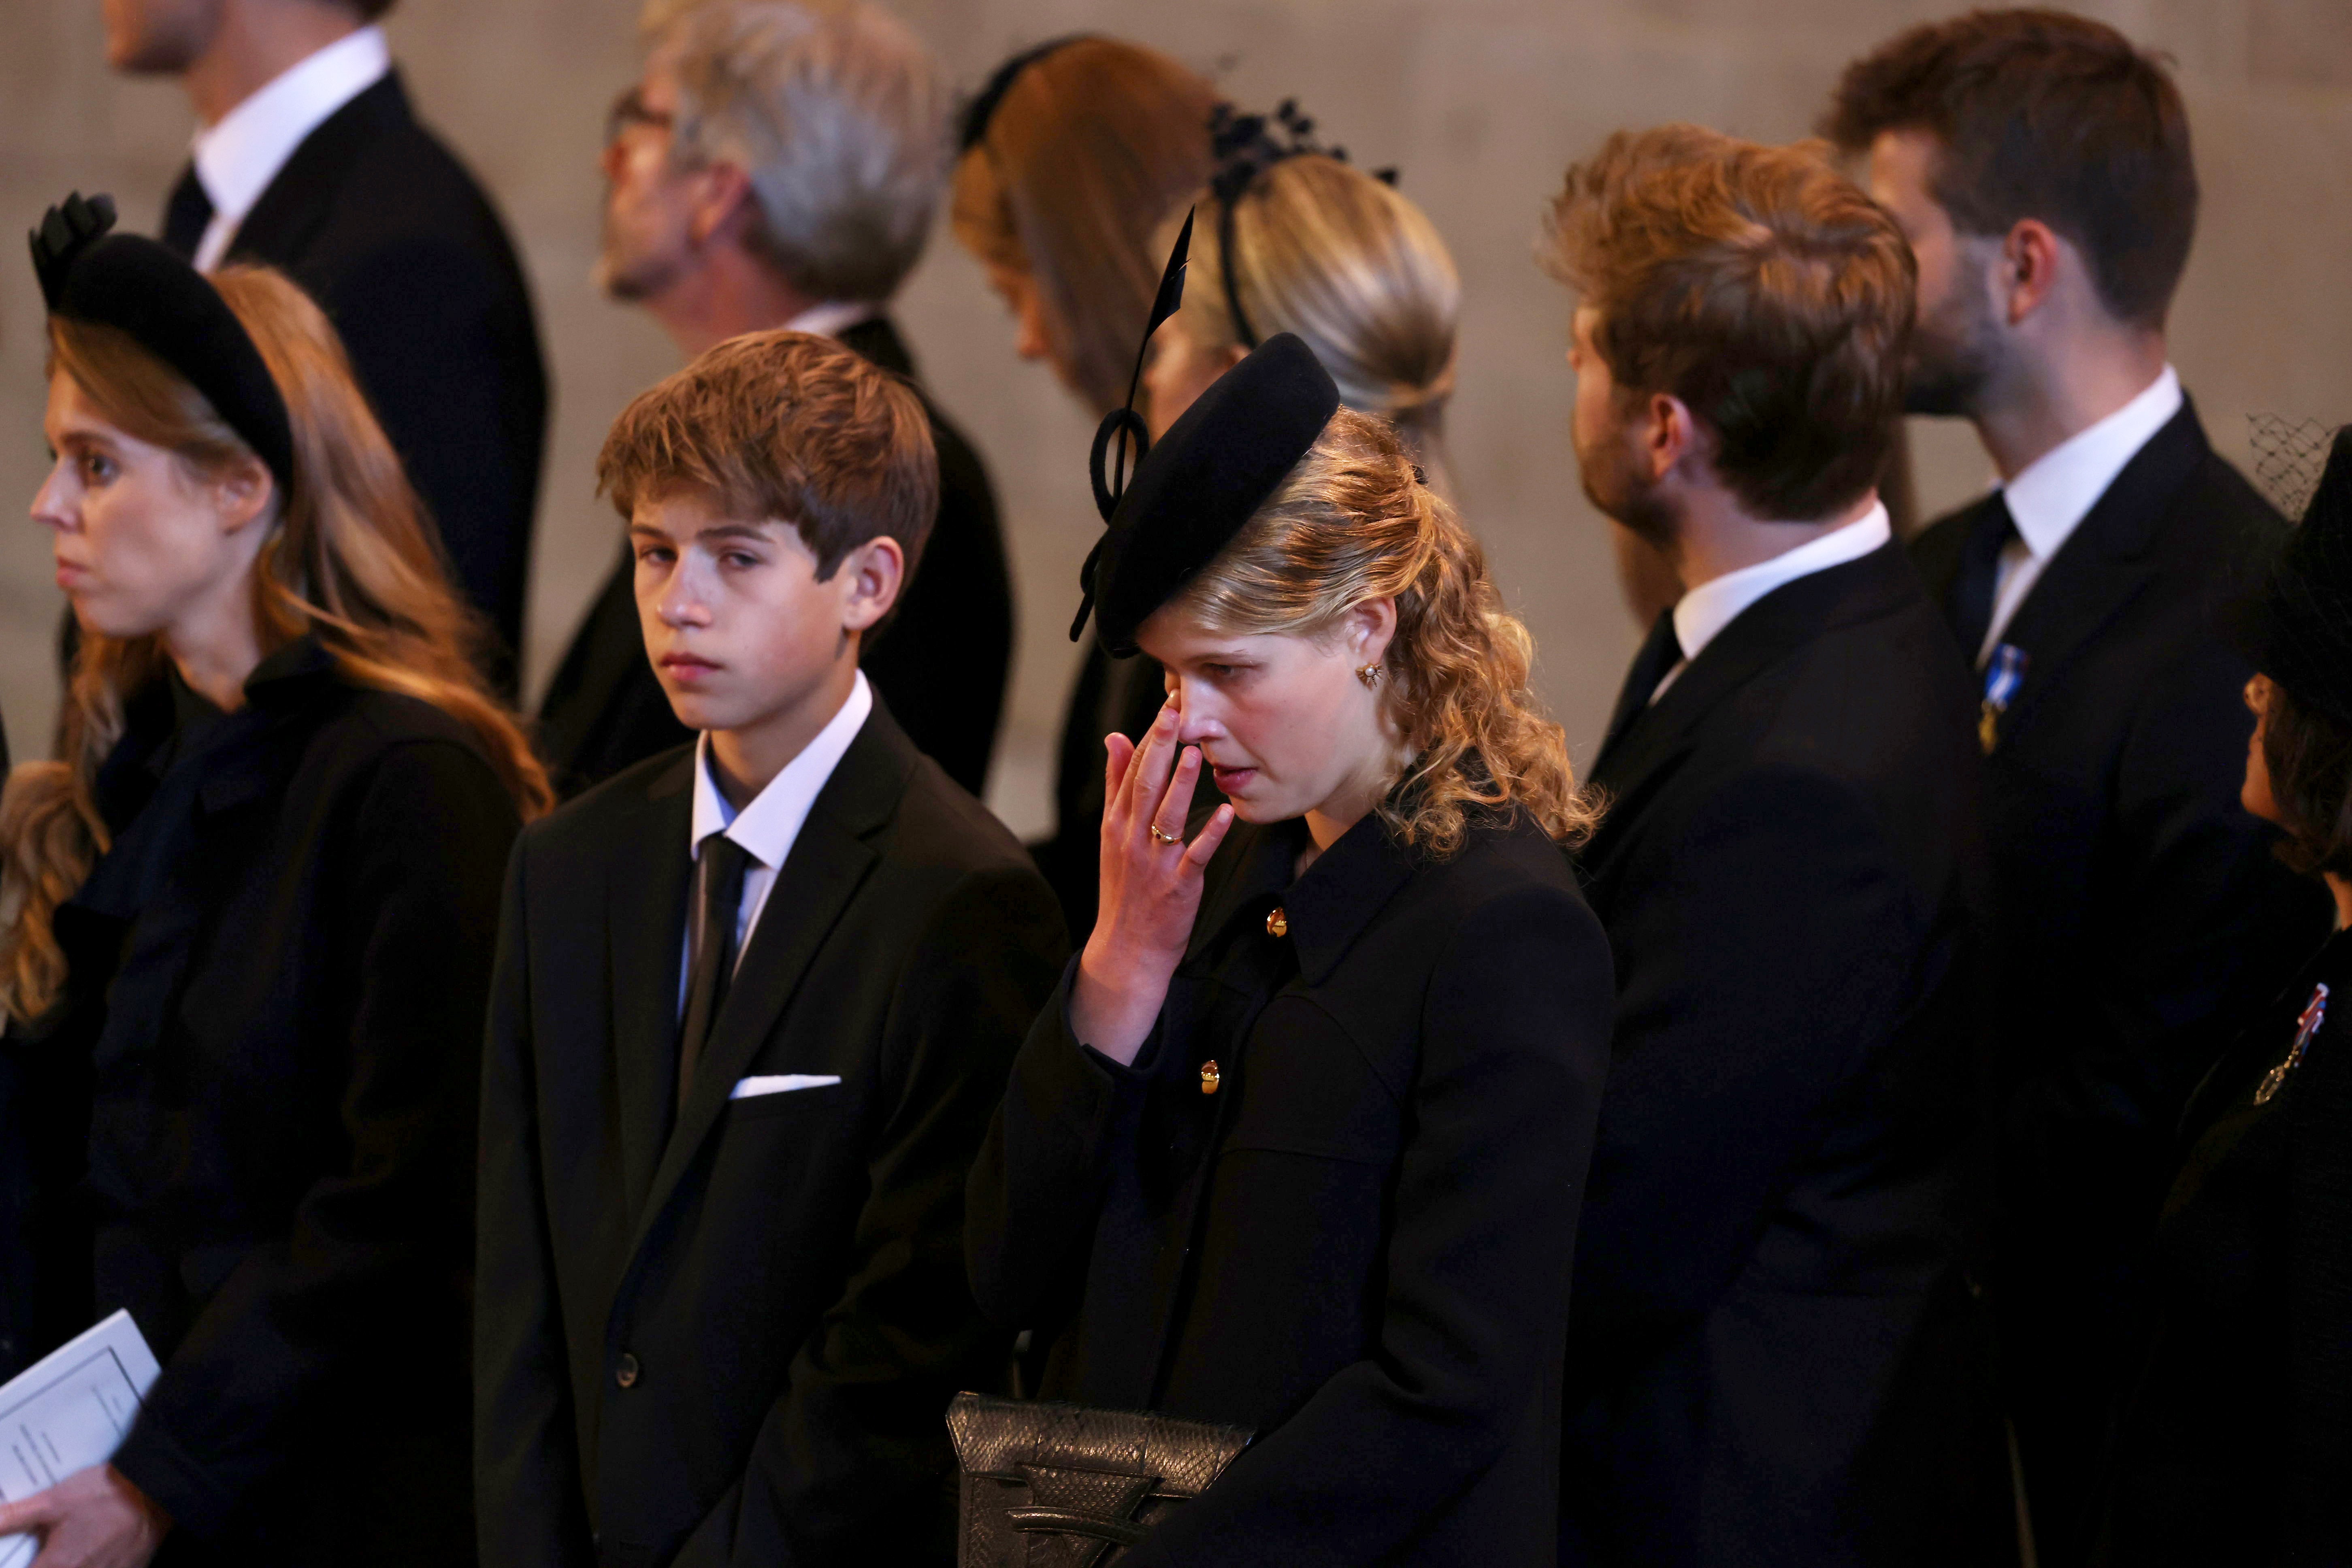 James, Viscount Severn and Lady Louise Windsor pay their respects in The Palace of Westminster during the procession for the lying in state